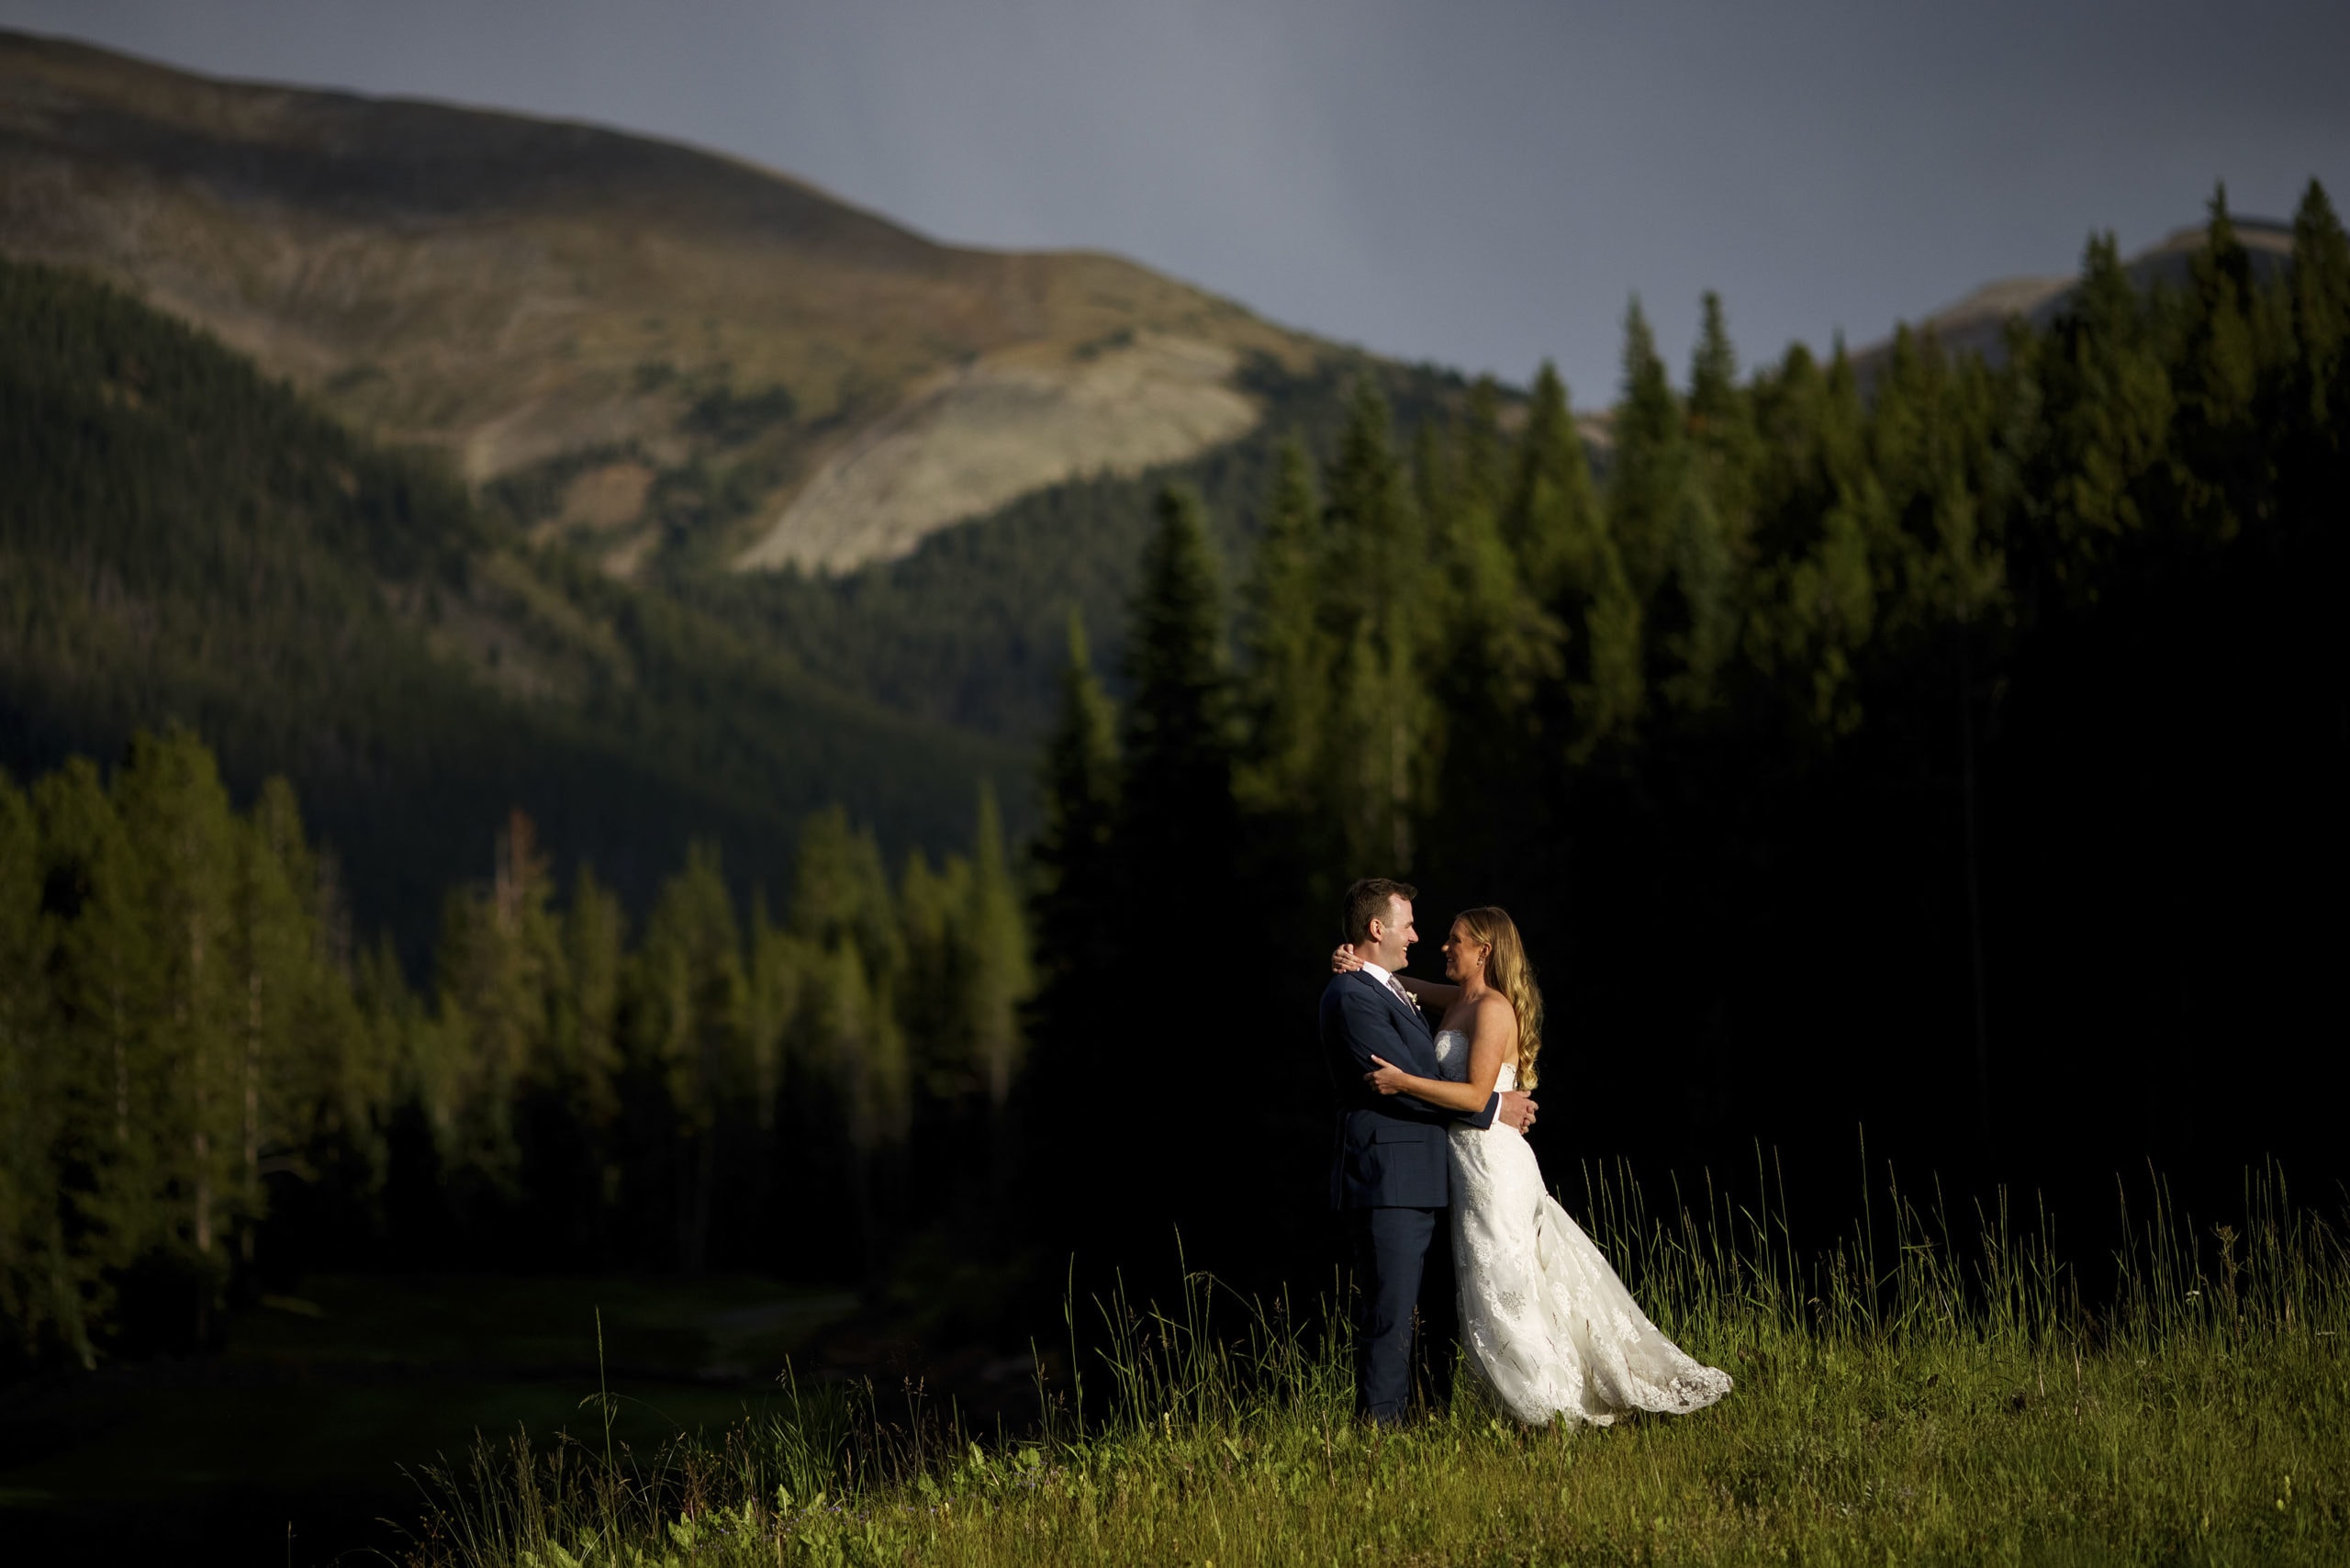 The groom and bride embrace during golden hour with the Tenmile range in the background